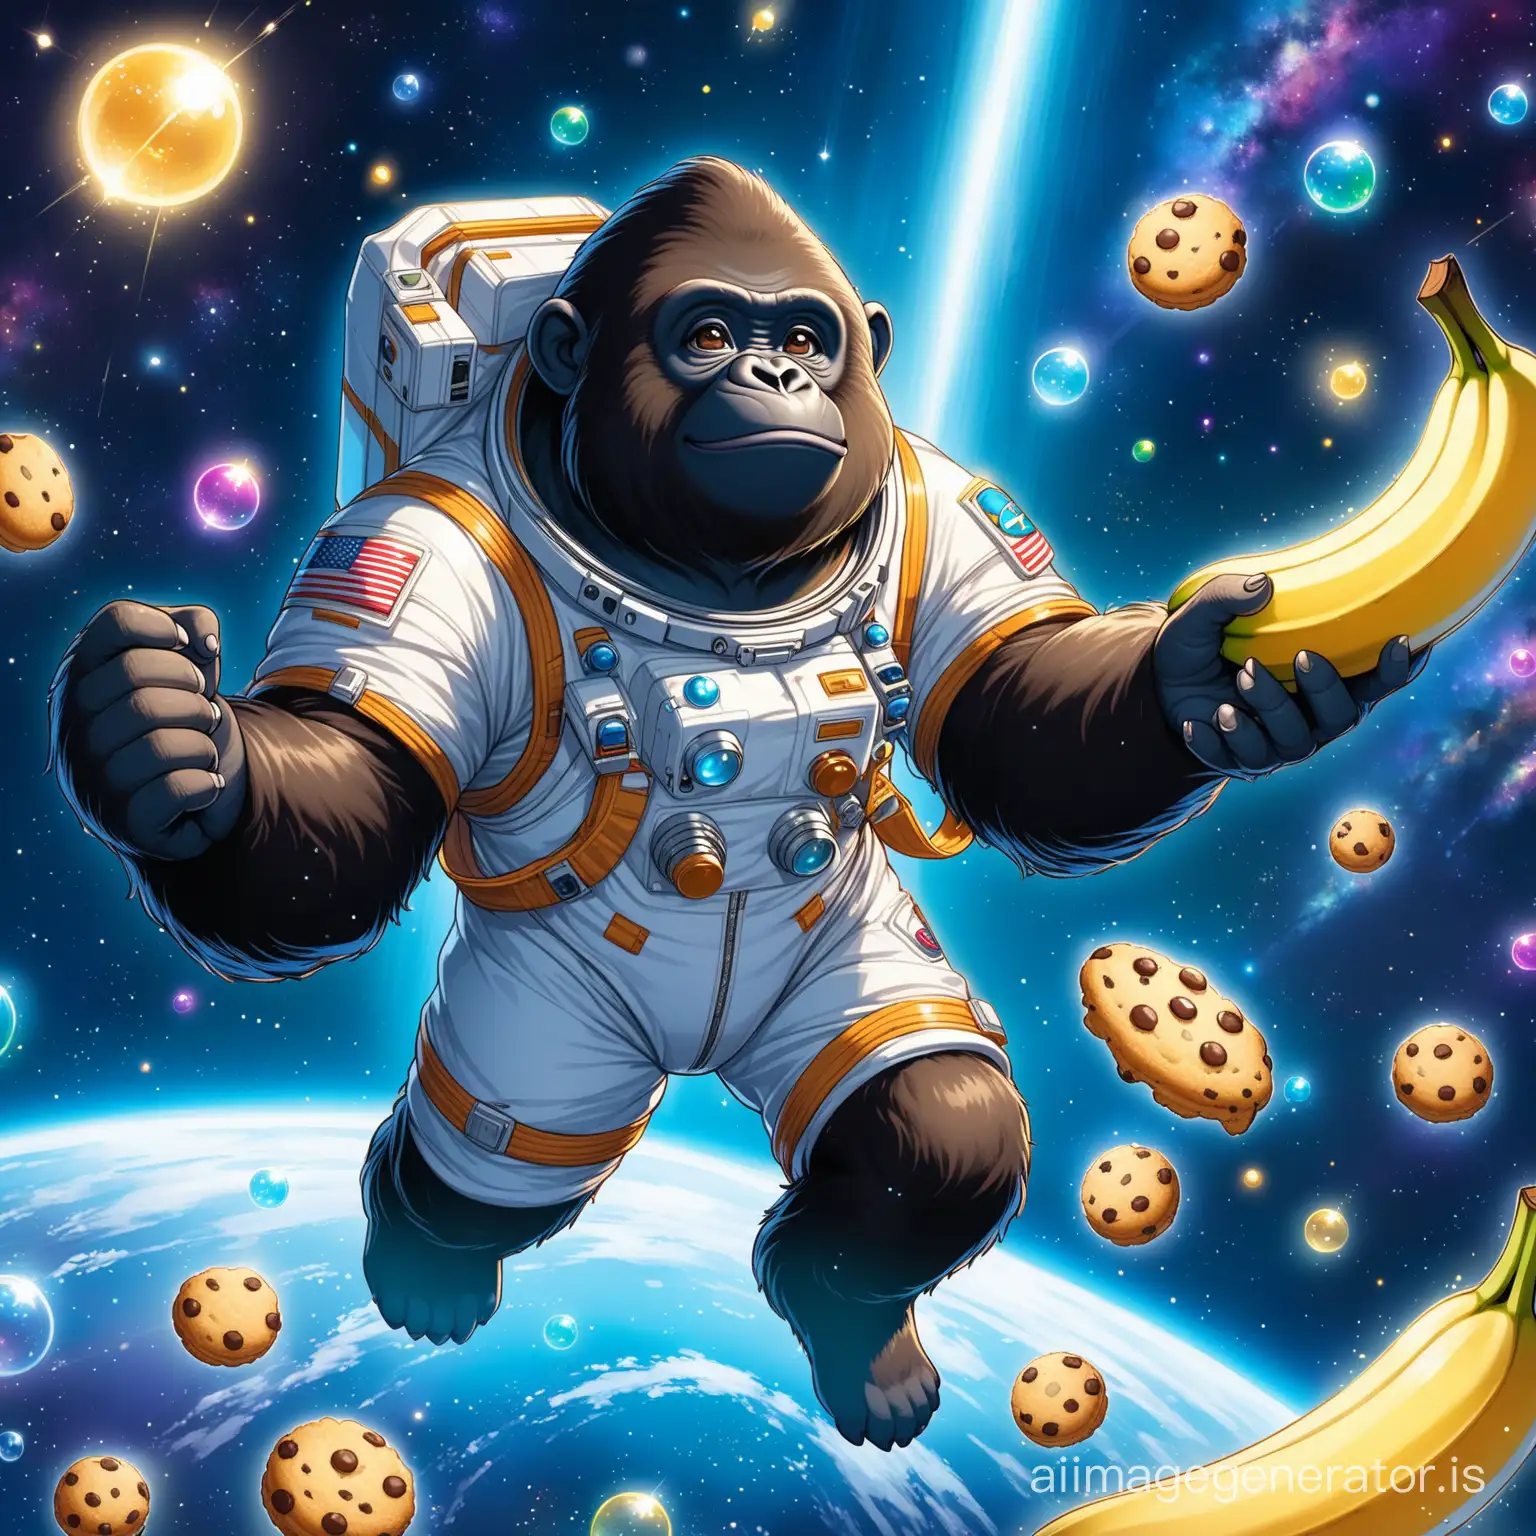 Joyful-Gorilla-in-Spacesuit-with-Banana-amid-Scattered-Bubbles-and-Cookies-in-Space